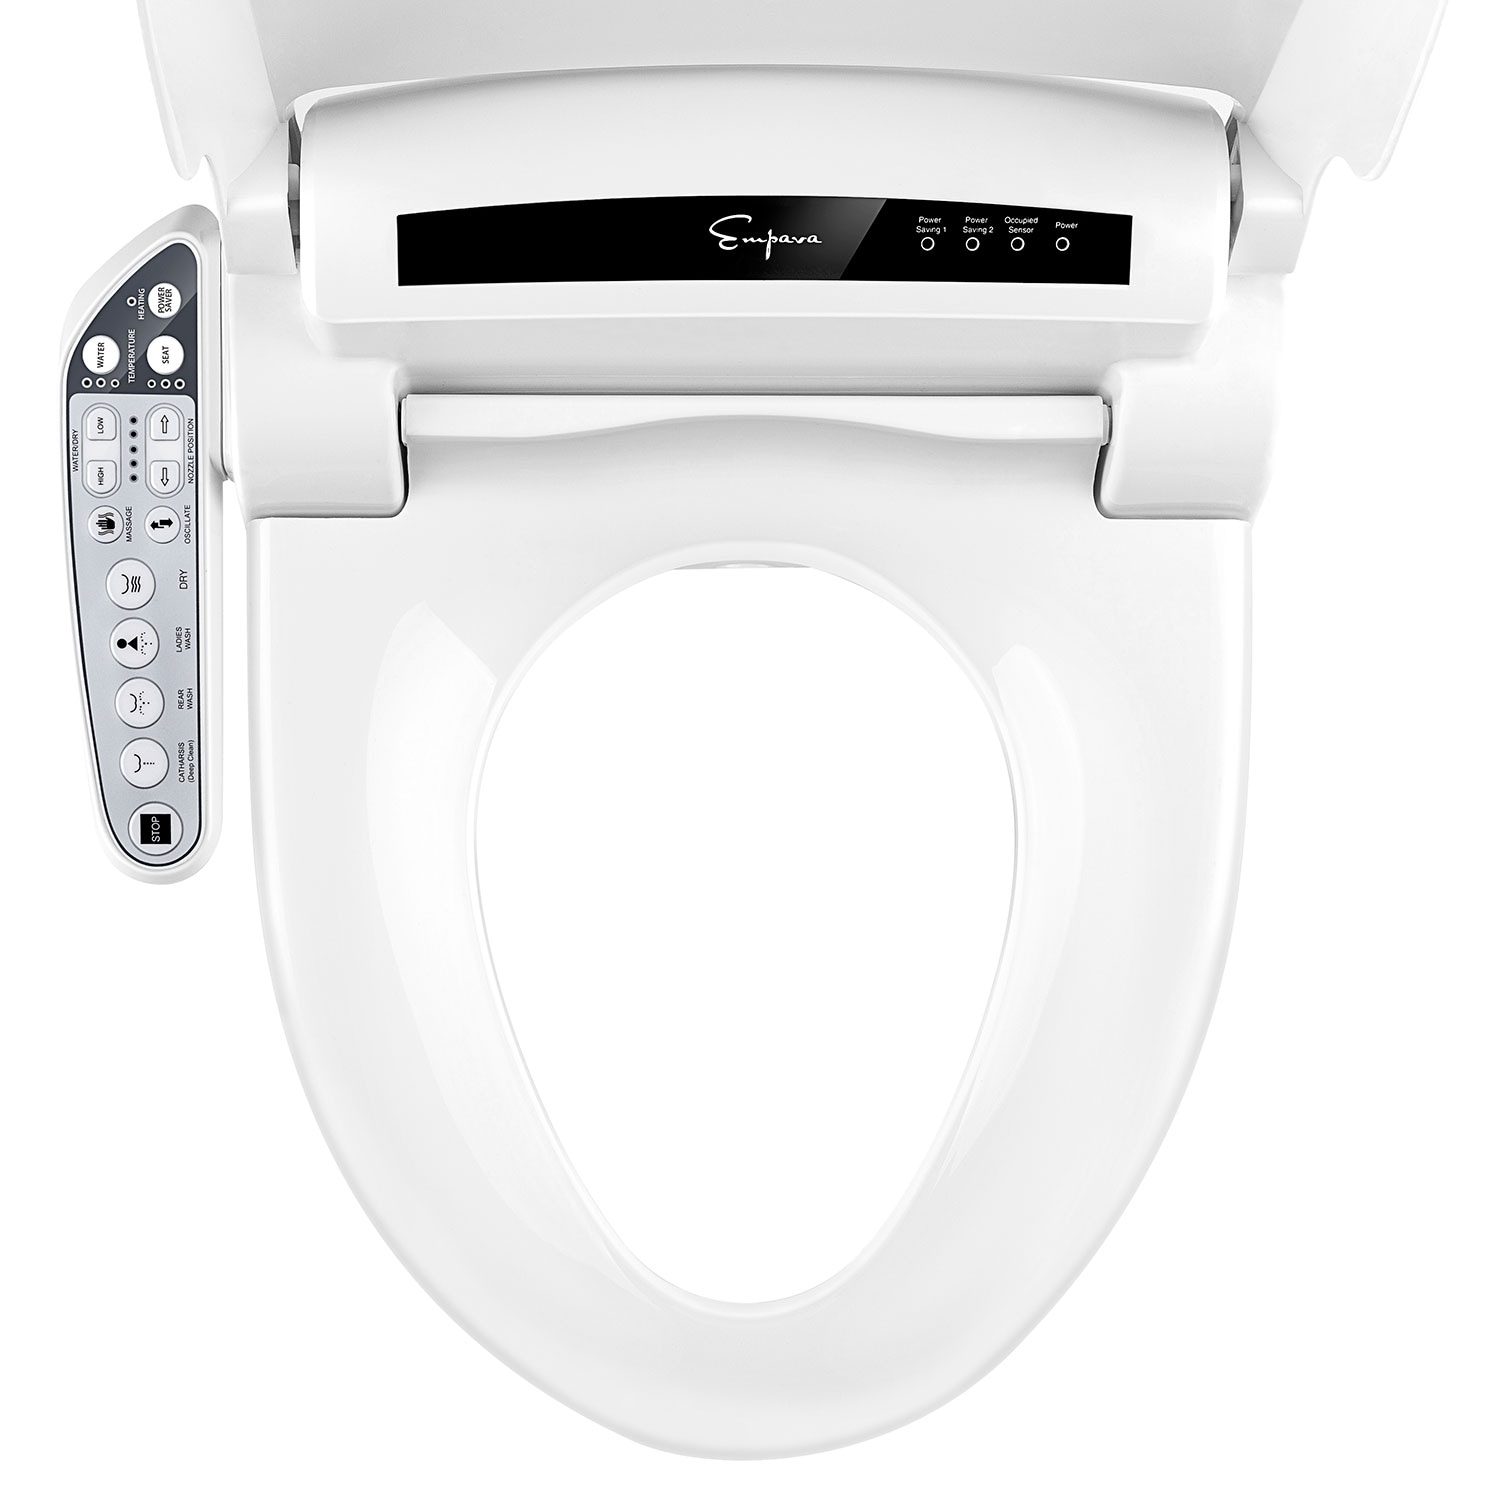 Seat Pillow with Bidet - Accessories